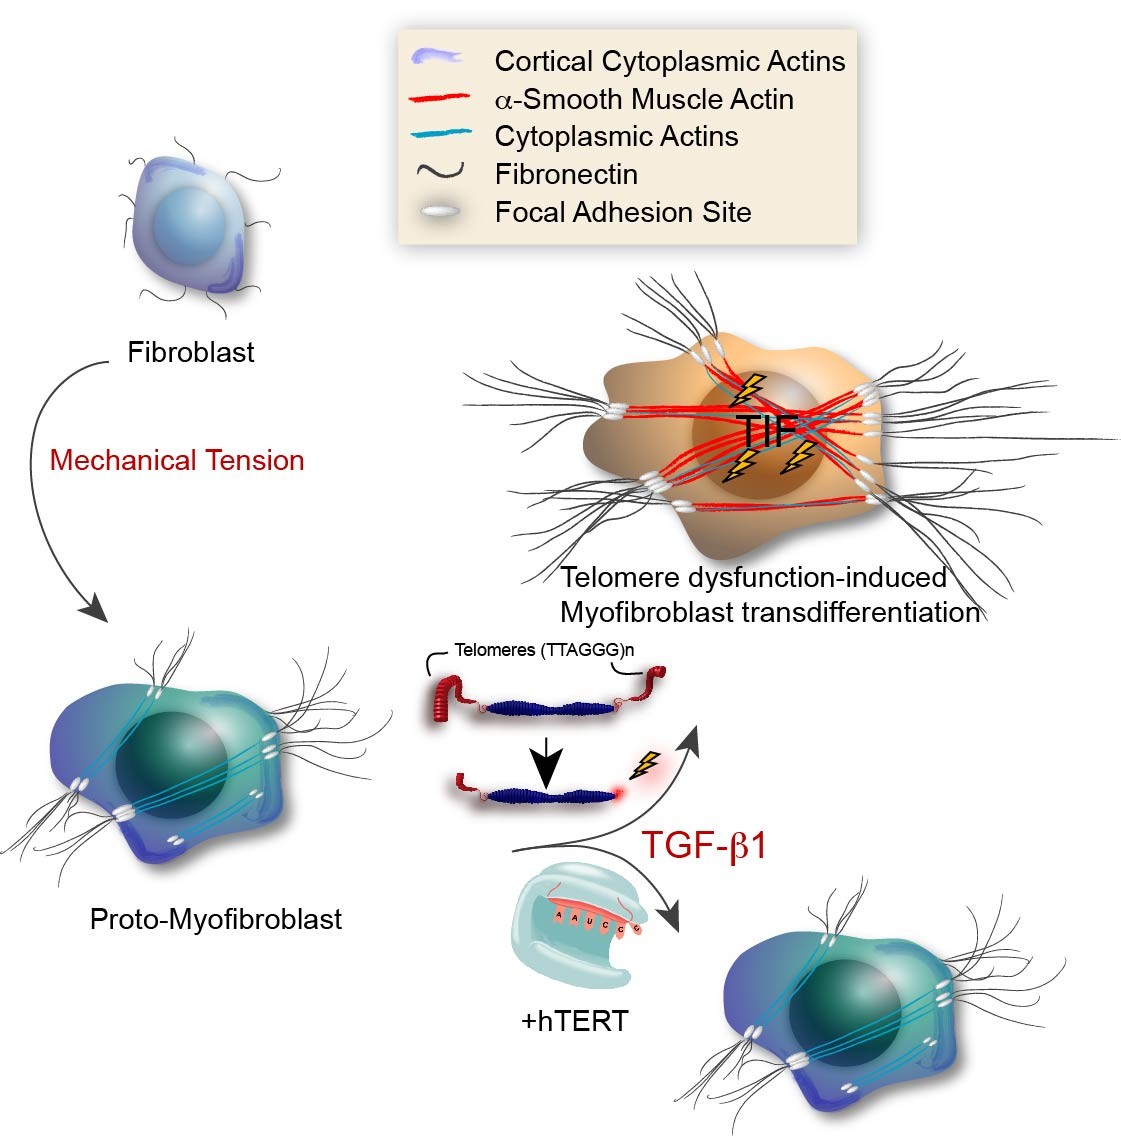 Text Box:    Model illustrating the role for TDIS in myofibroblast transdifferentiation   